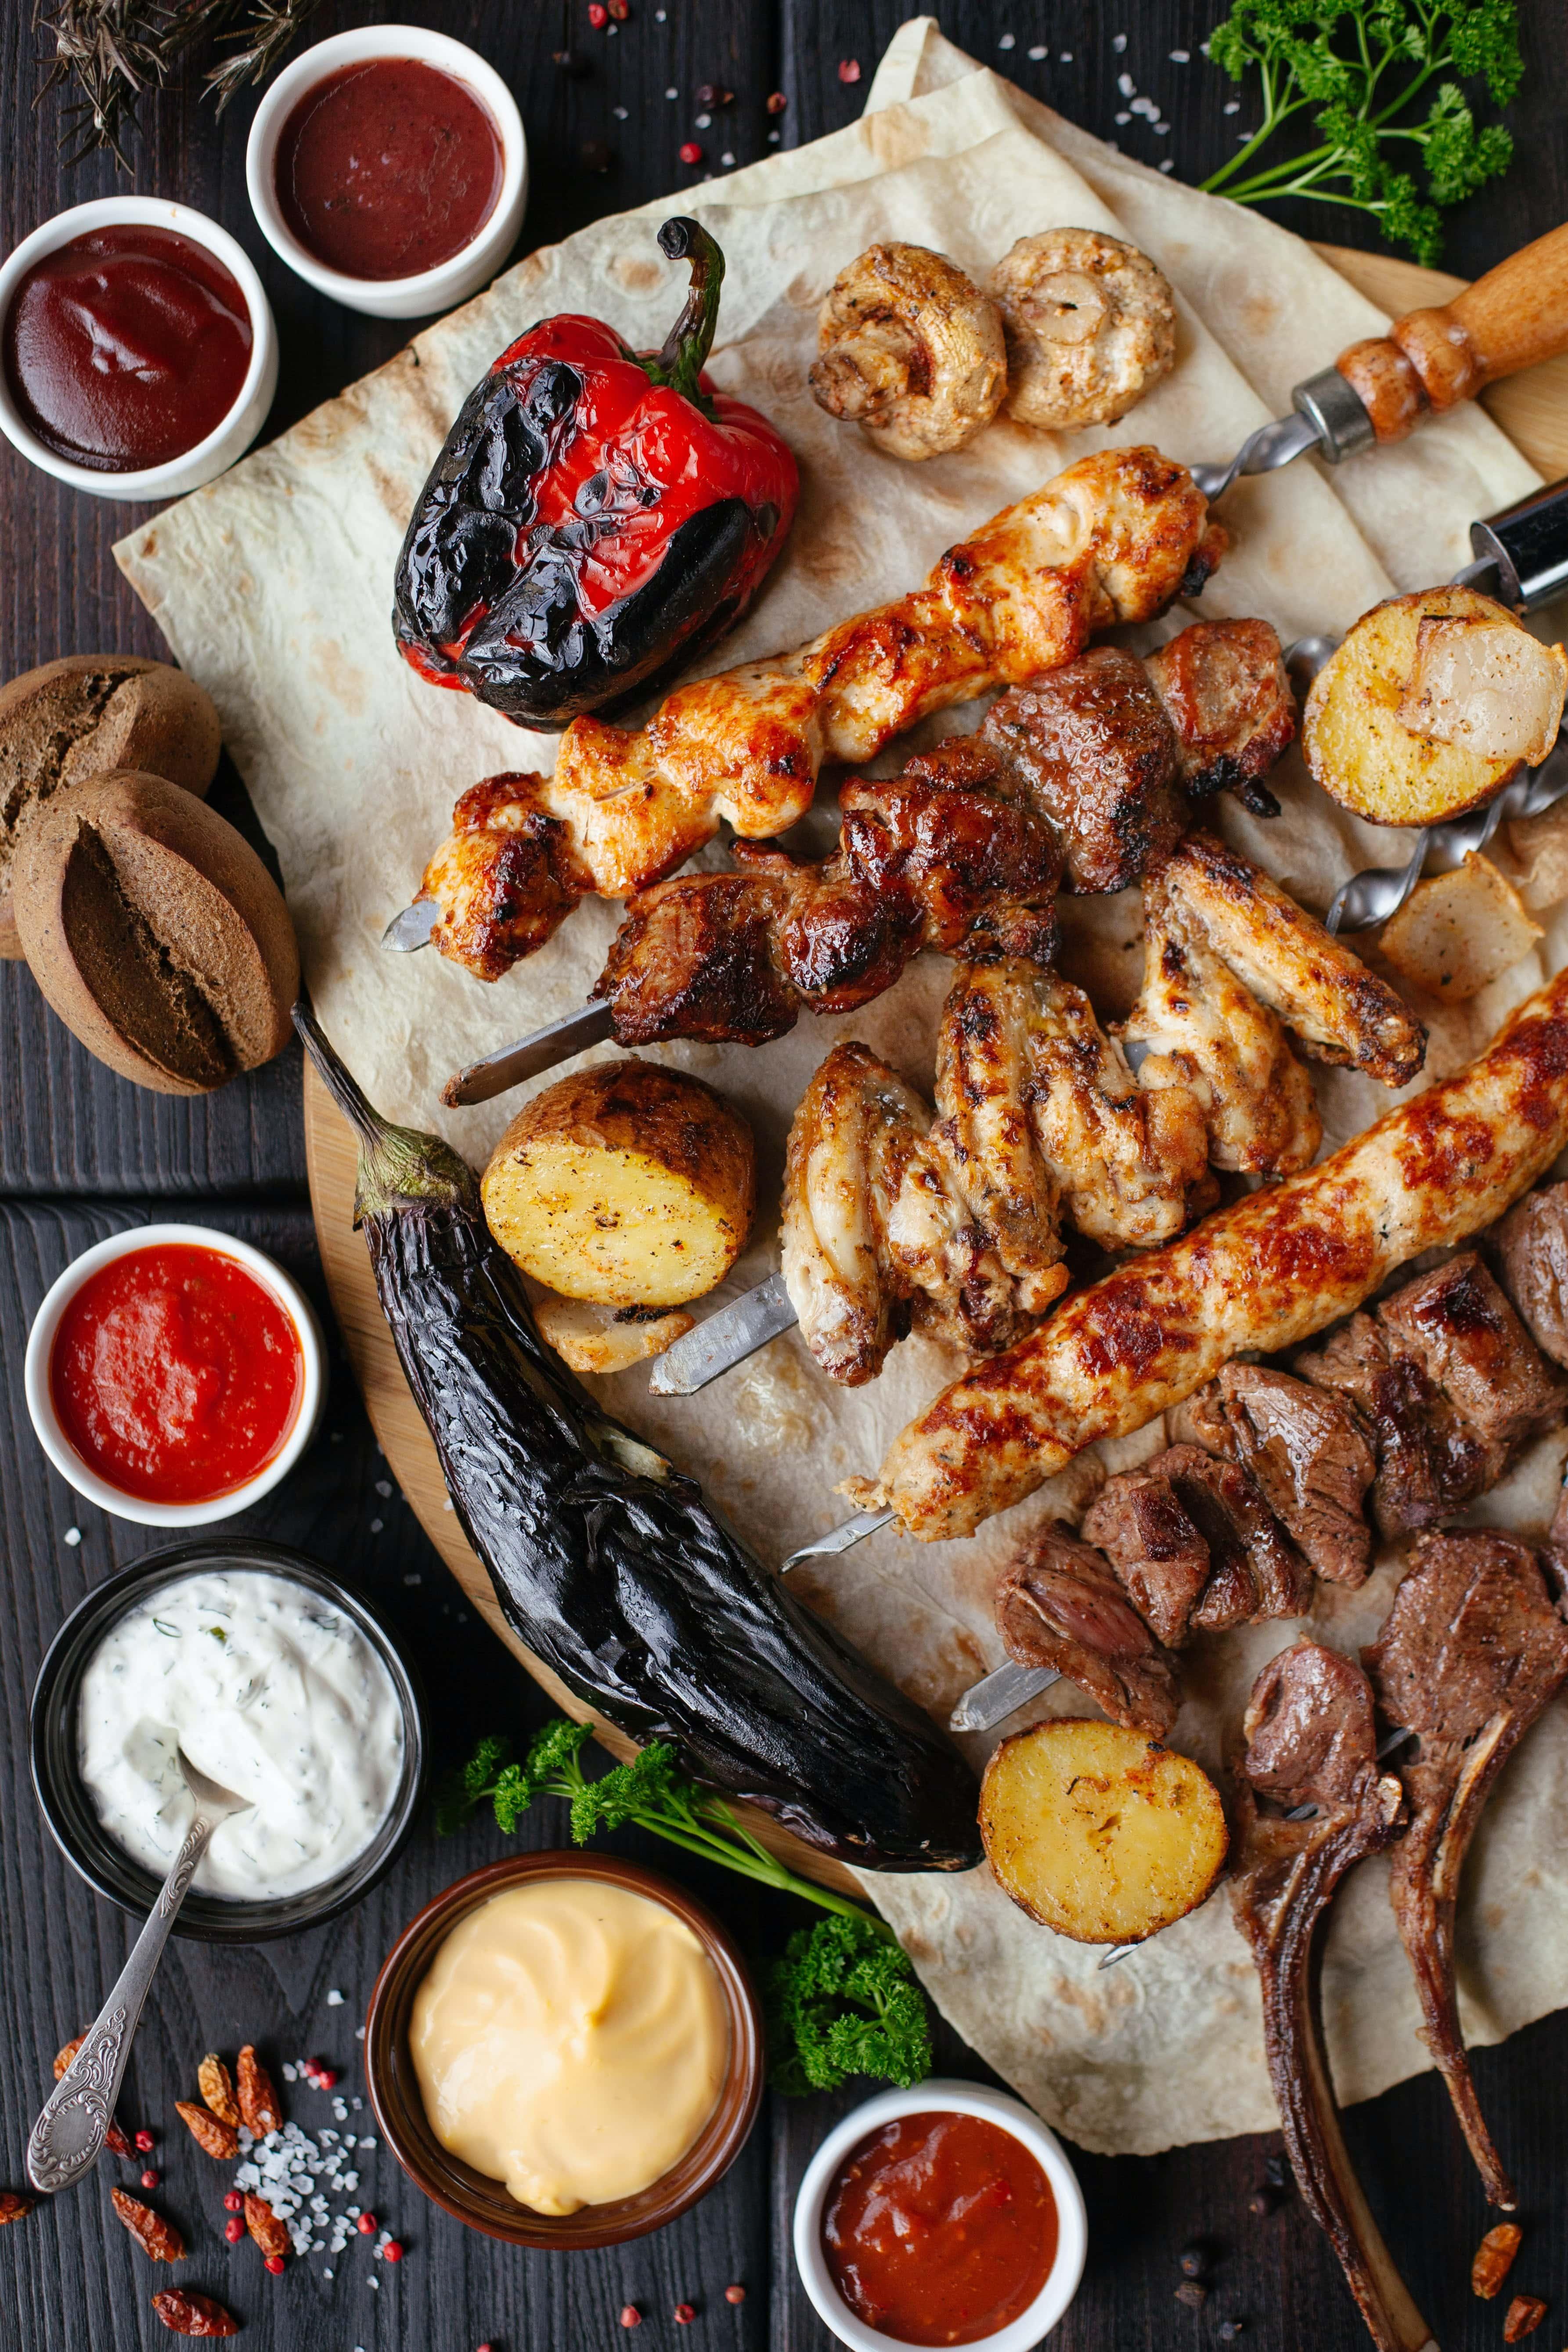 Kabobs of grilled meat surrounded by grilled vegetebles, mushrooms, and sauces